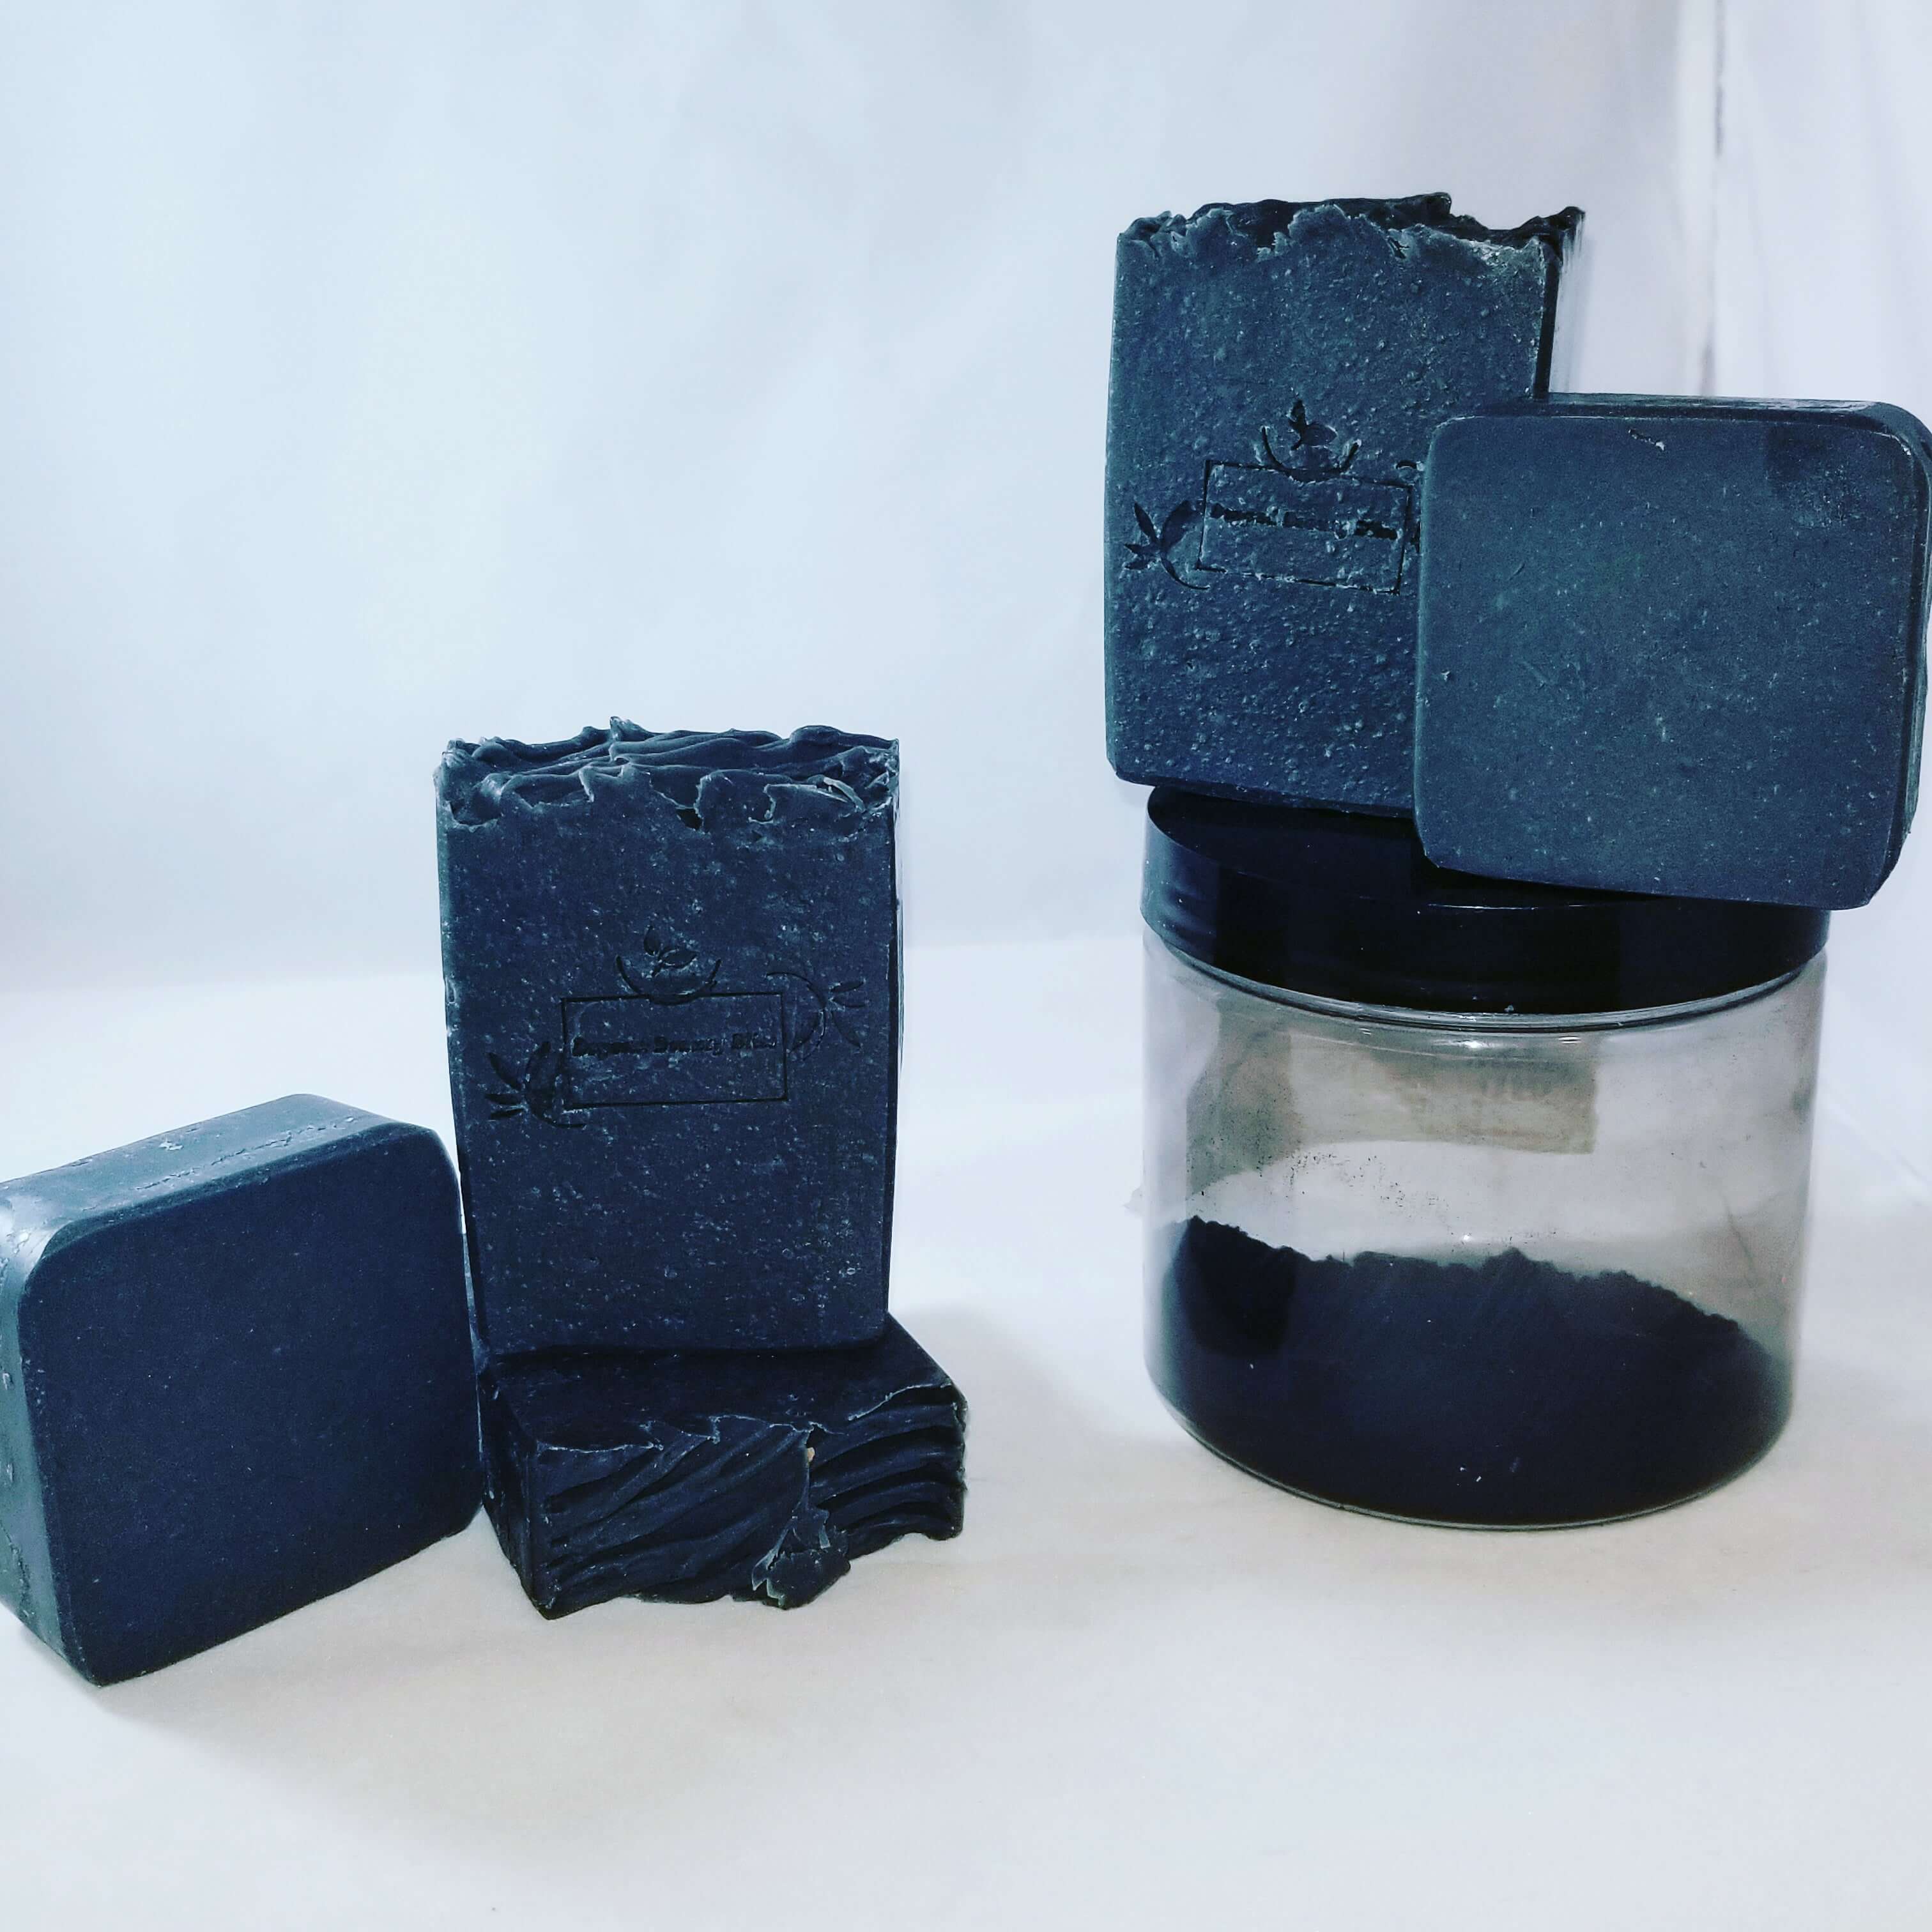 Black Activated Charcoal Soap